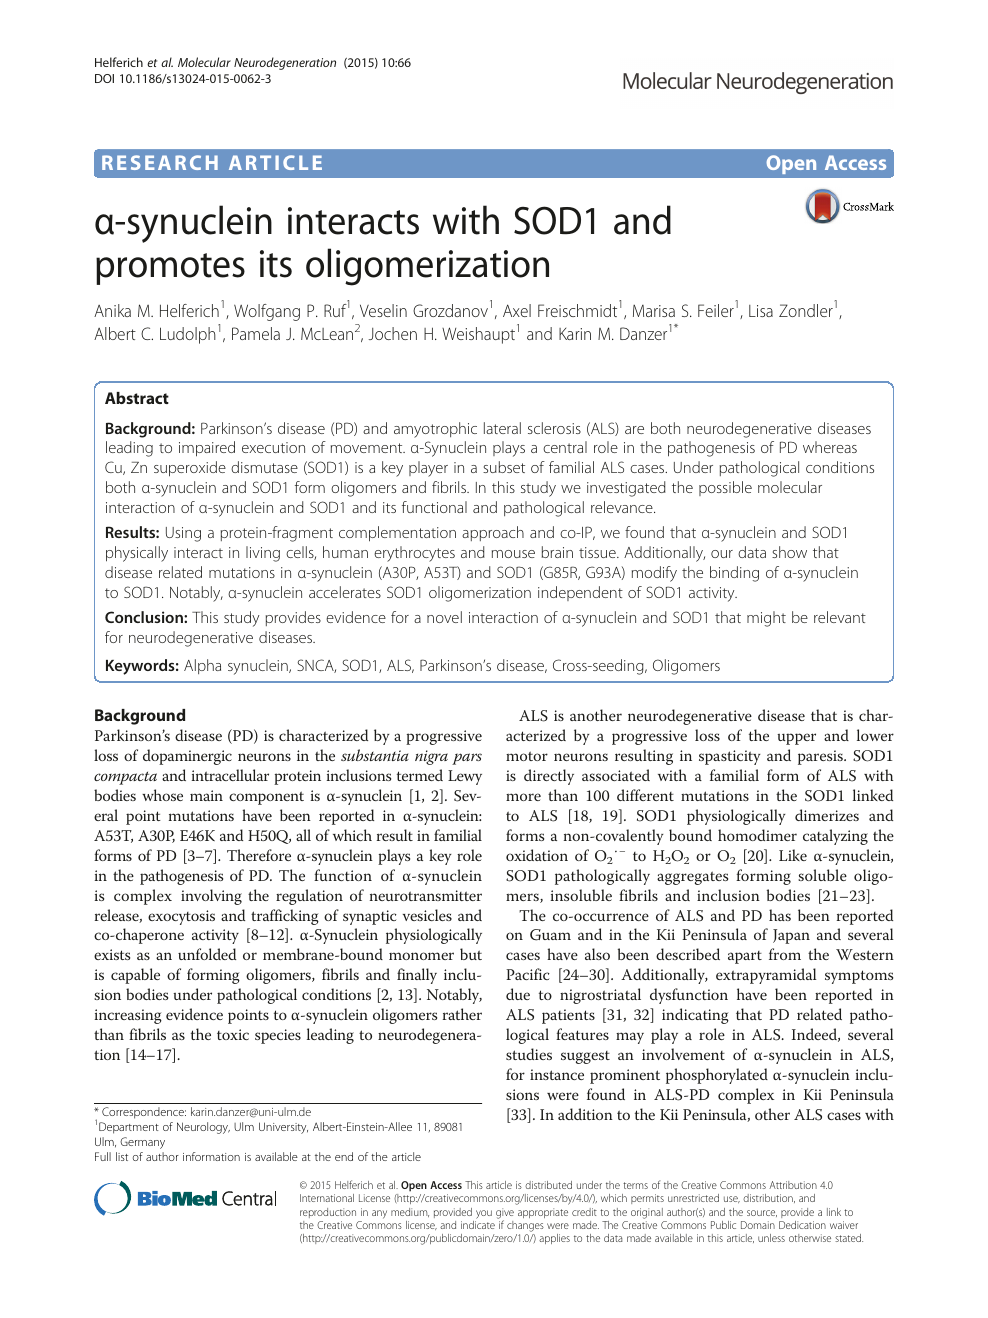 A Synuclein Interacts With Sod1 And Promotes Its Oligomerization Topic Of Research Paper In Biological Sciences Download Scholarly Article Pdf And Read For Free On Cyberleninka Open Science Hub